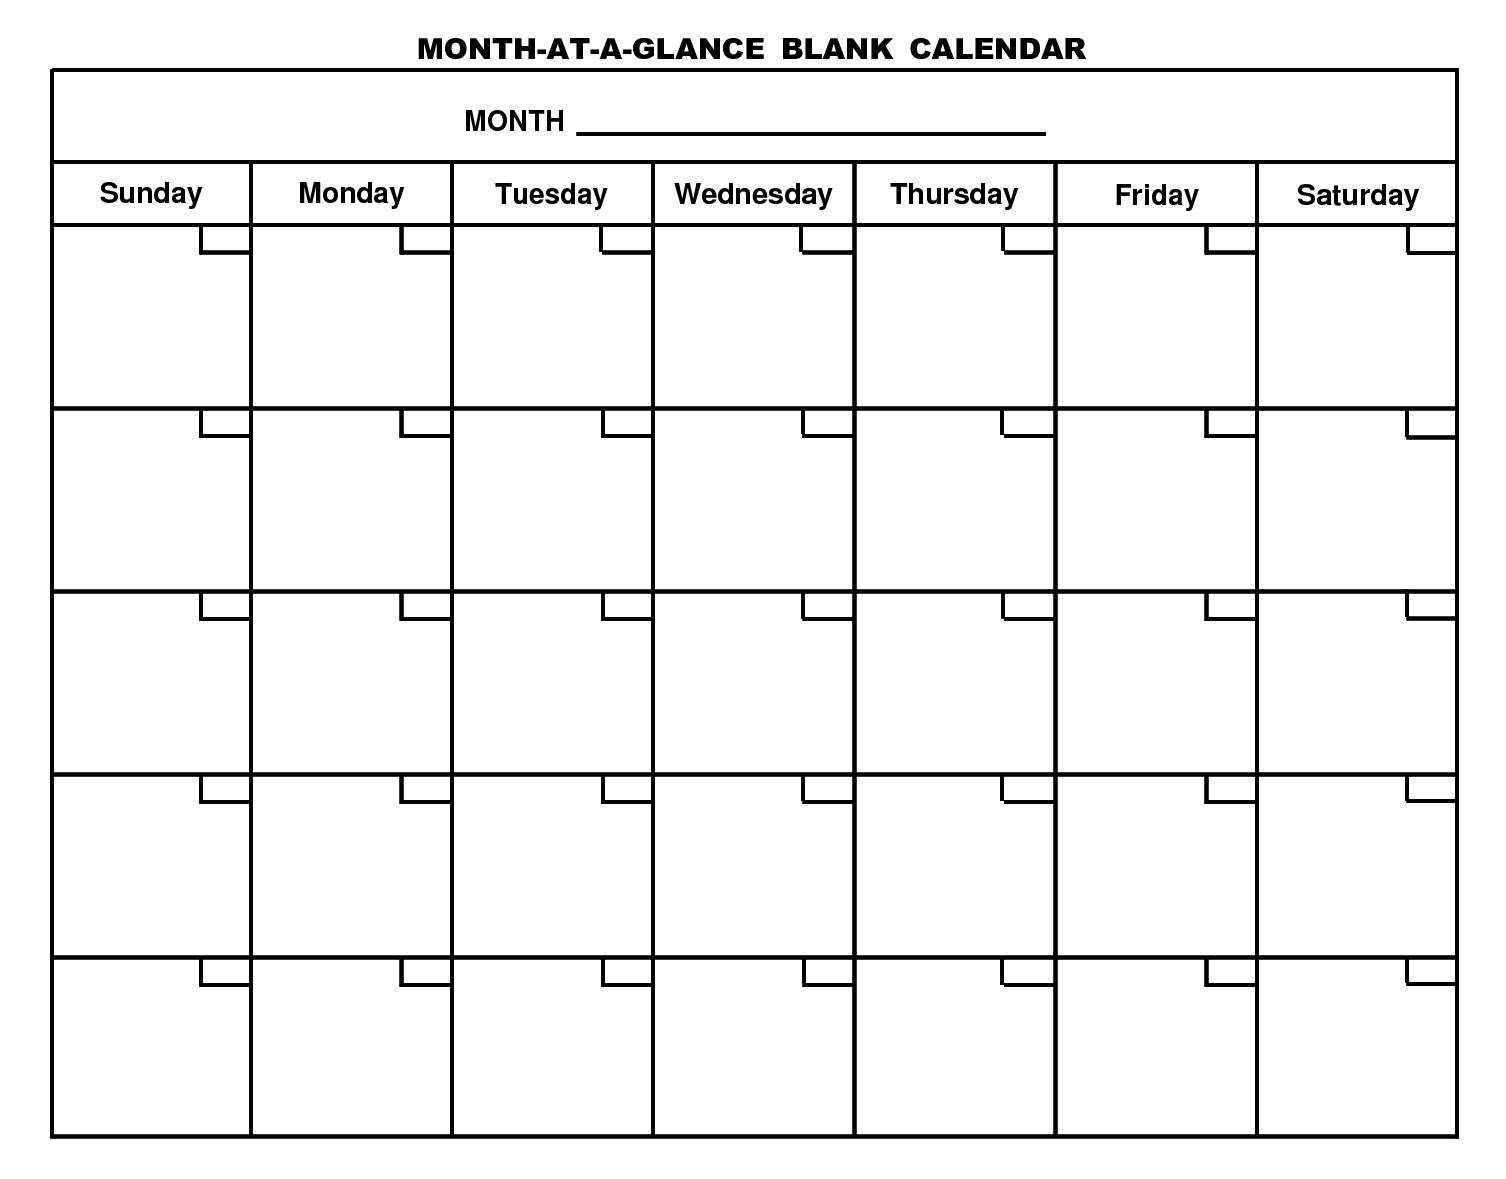 Month At A Glance Blank Calendar Template - Dalep.midnightpig.co Throughout Month At A Glance Blank Calendar Template